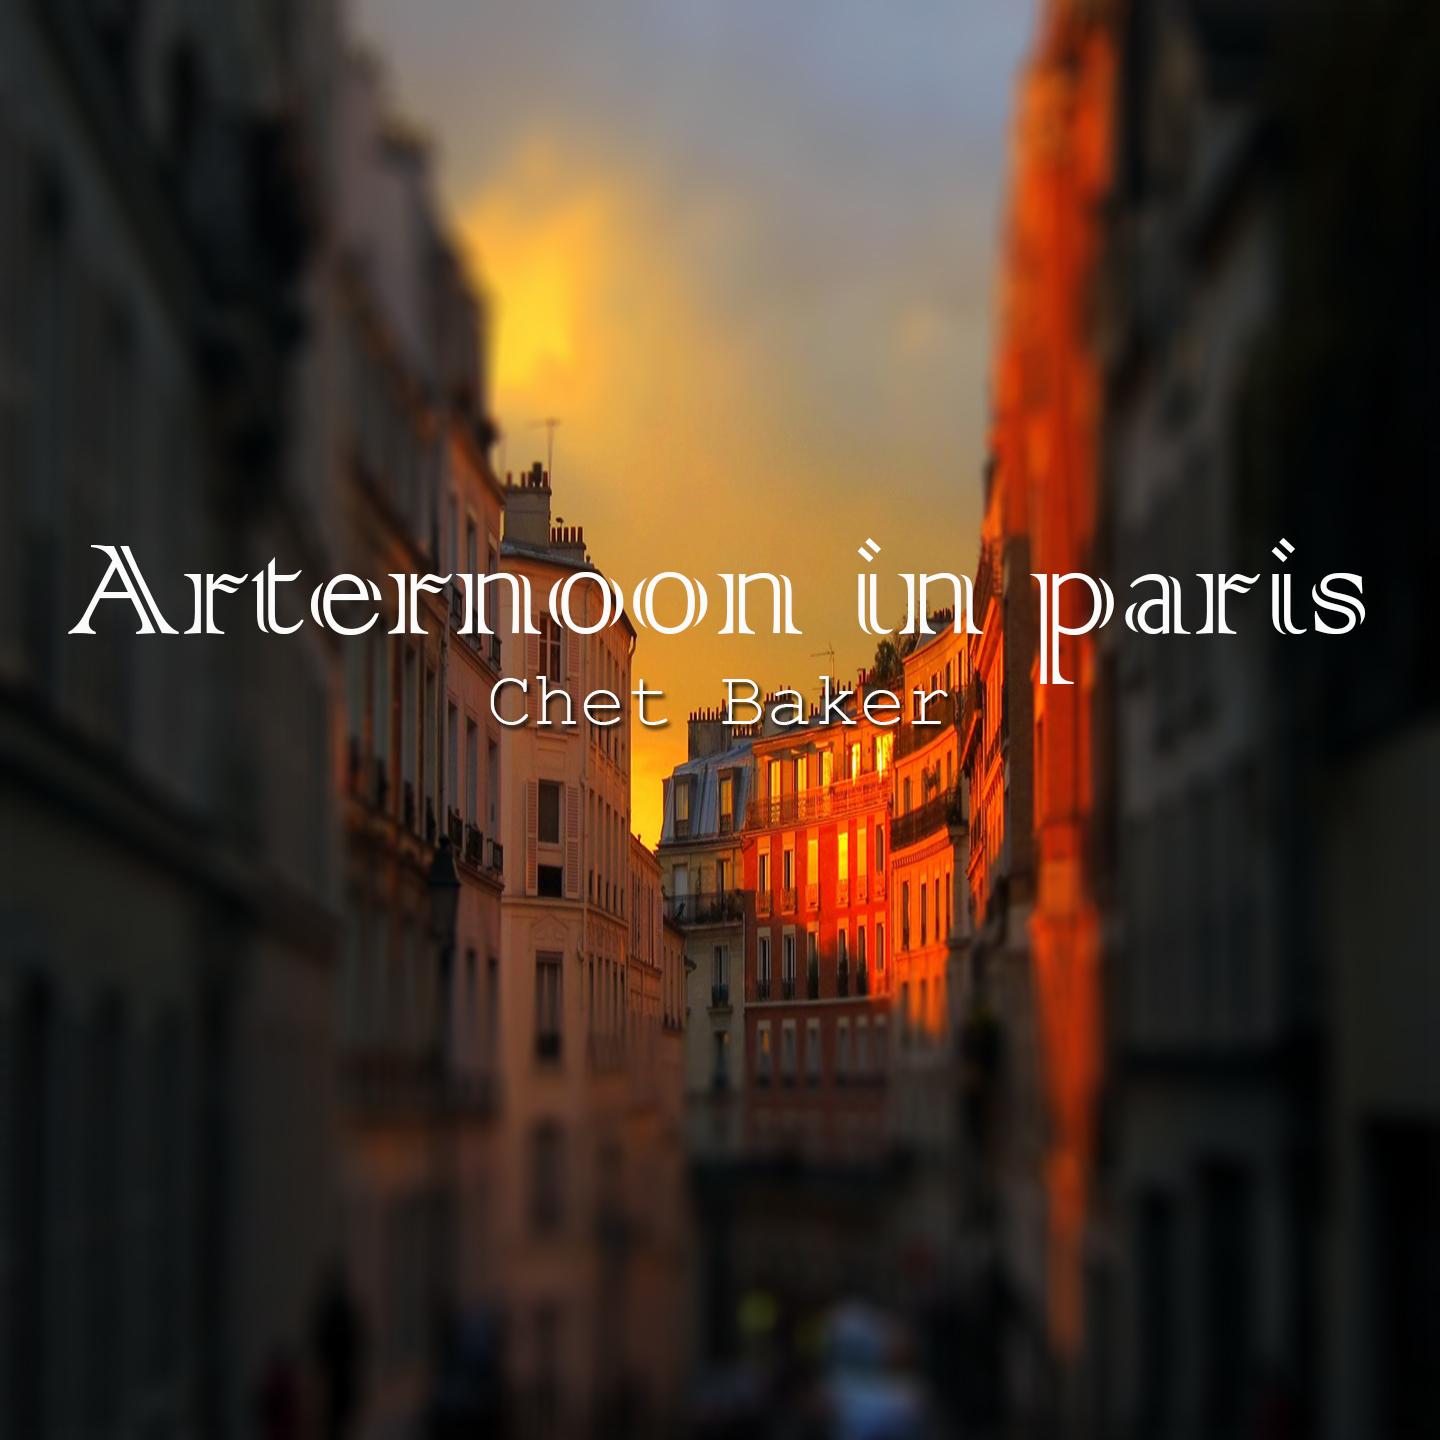 Afternoon in paris专辑